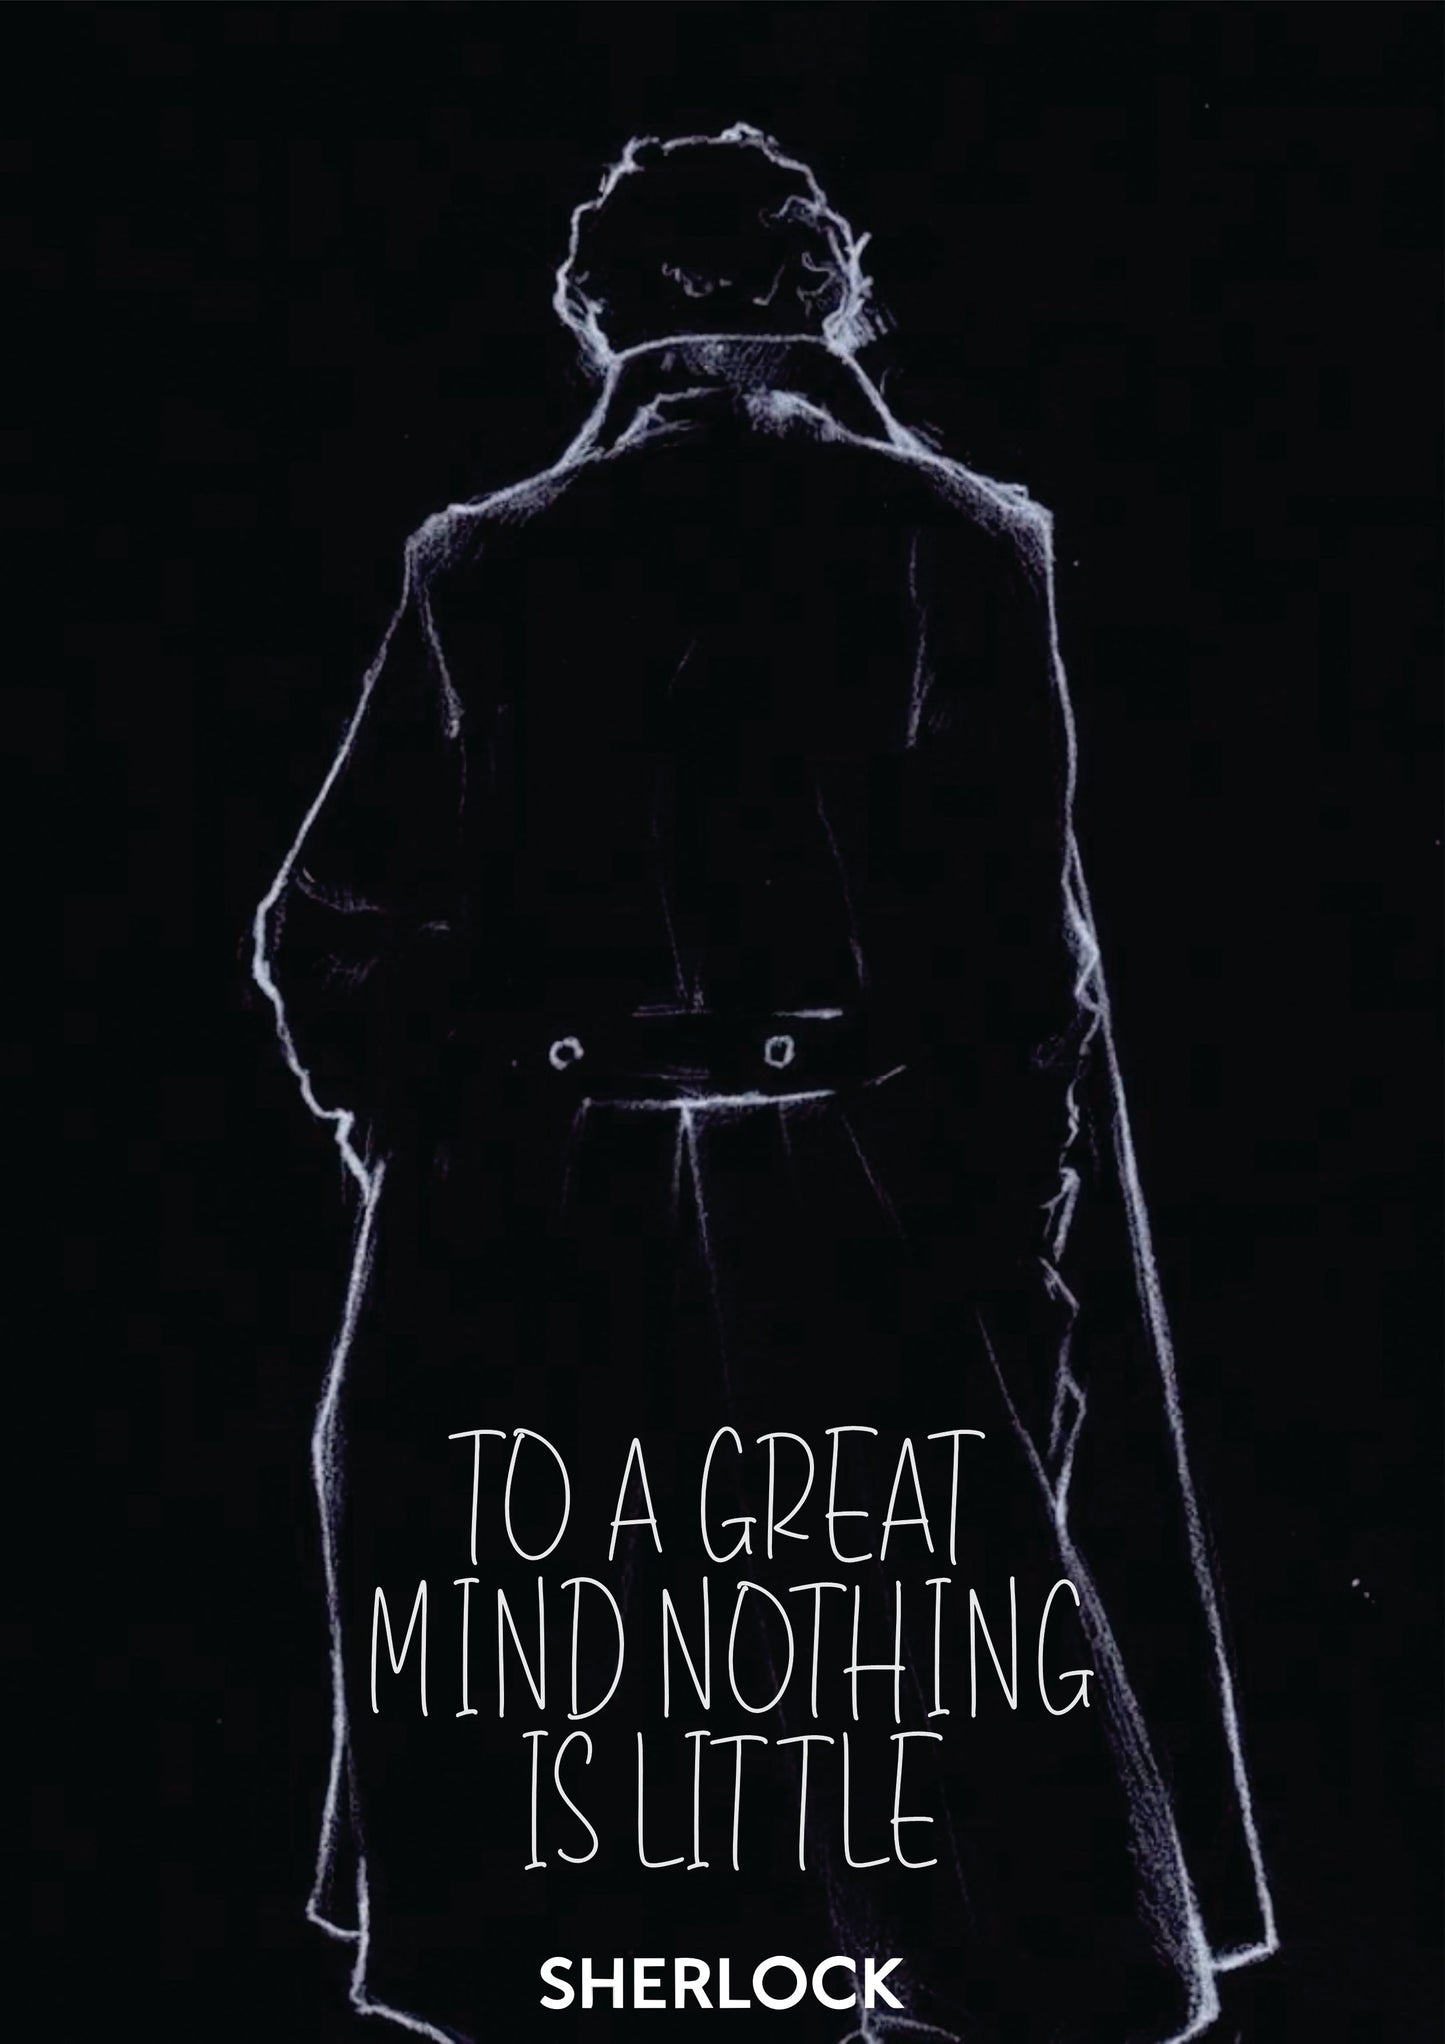 Sherlock - To a great mind, nothing is little